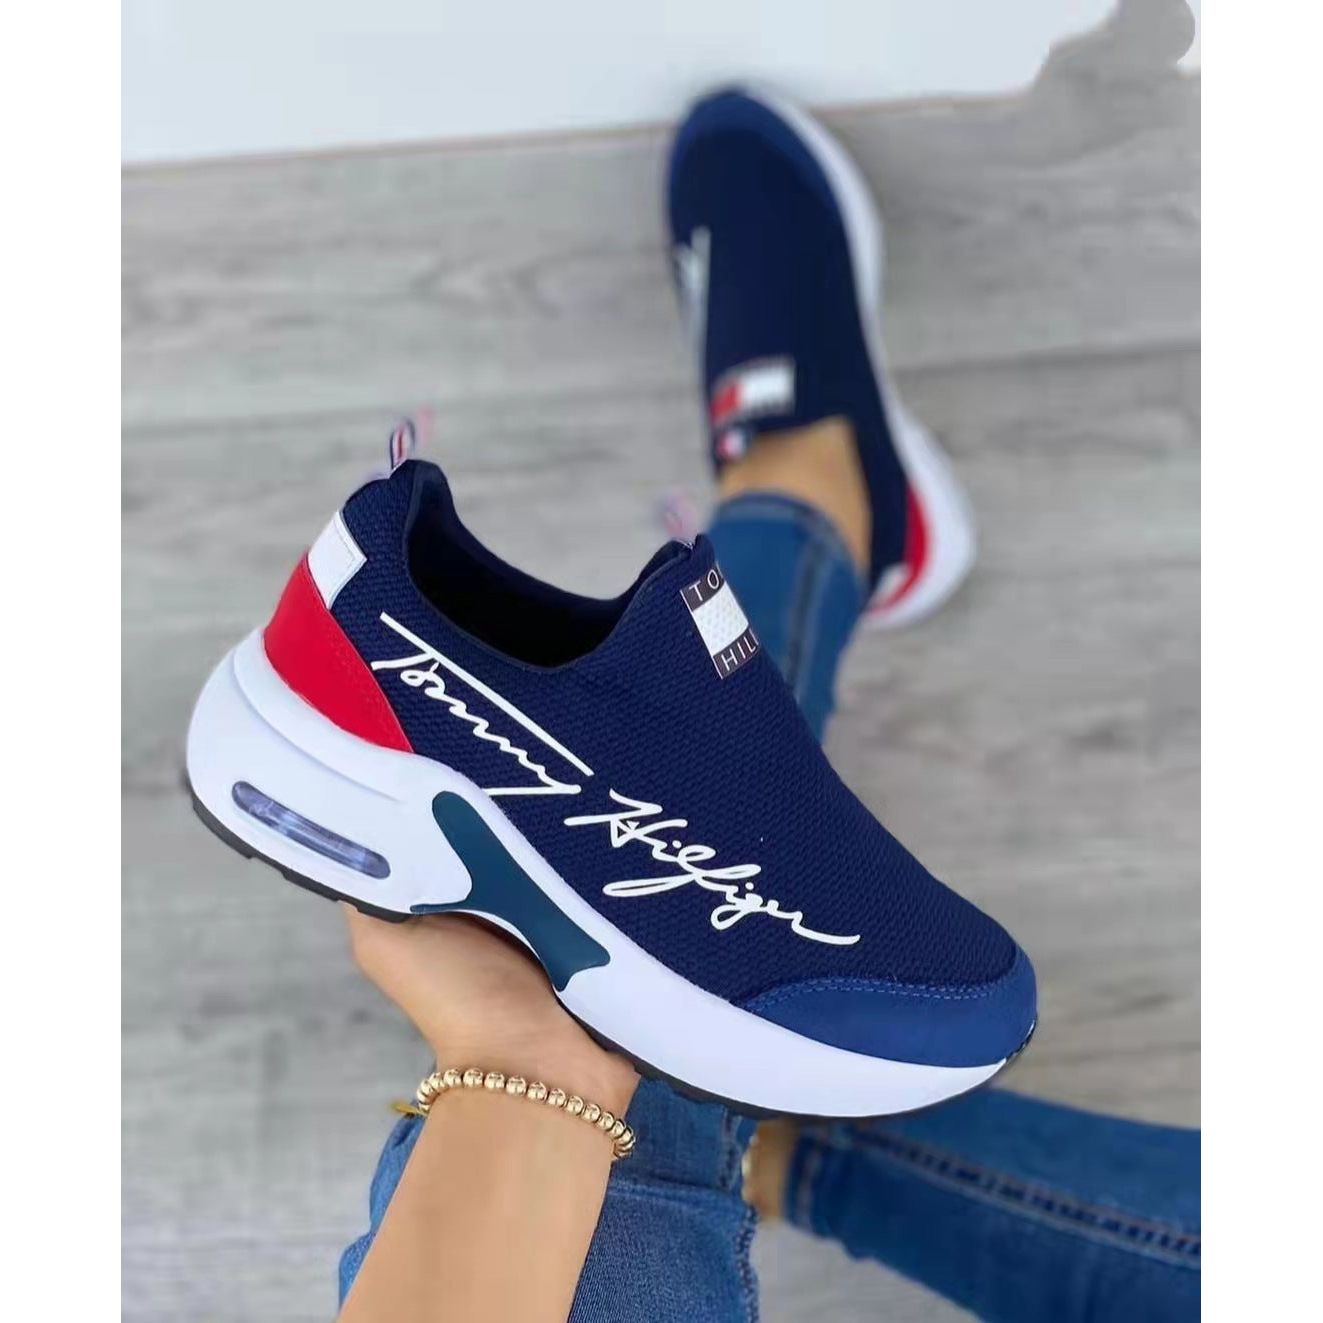 Buy Online Premimum Quality, Trendy and Highly Comfortable Air Cushion Sneakers For Women - FEYONAS